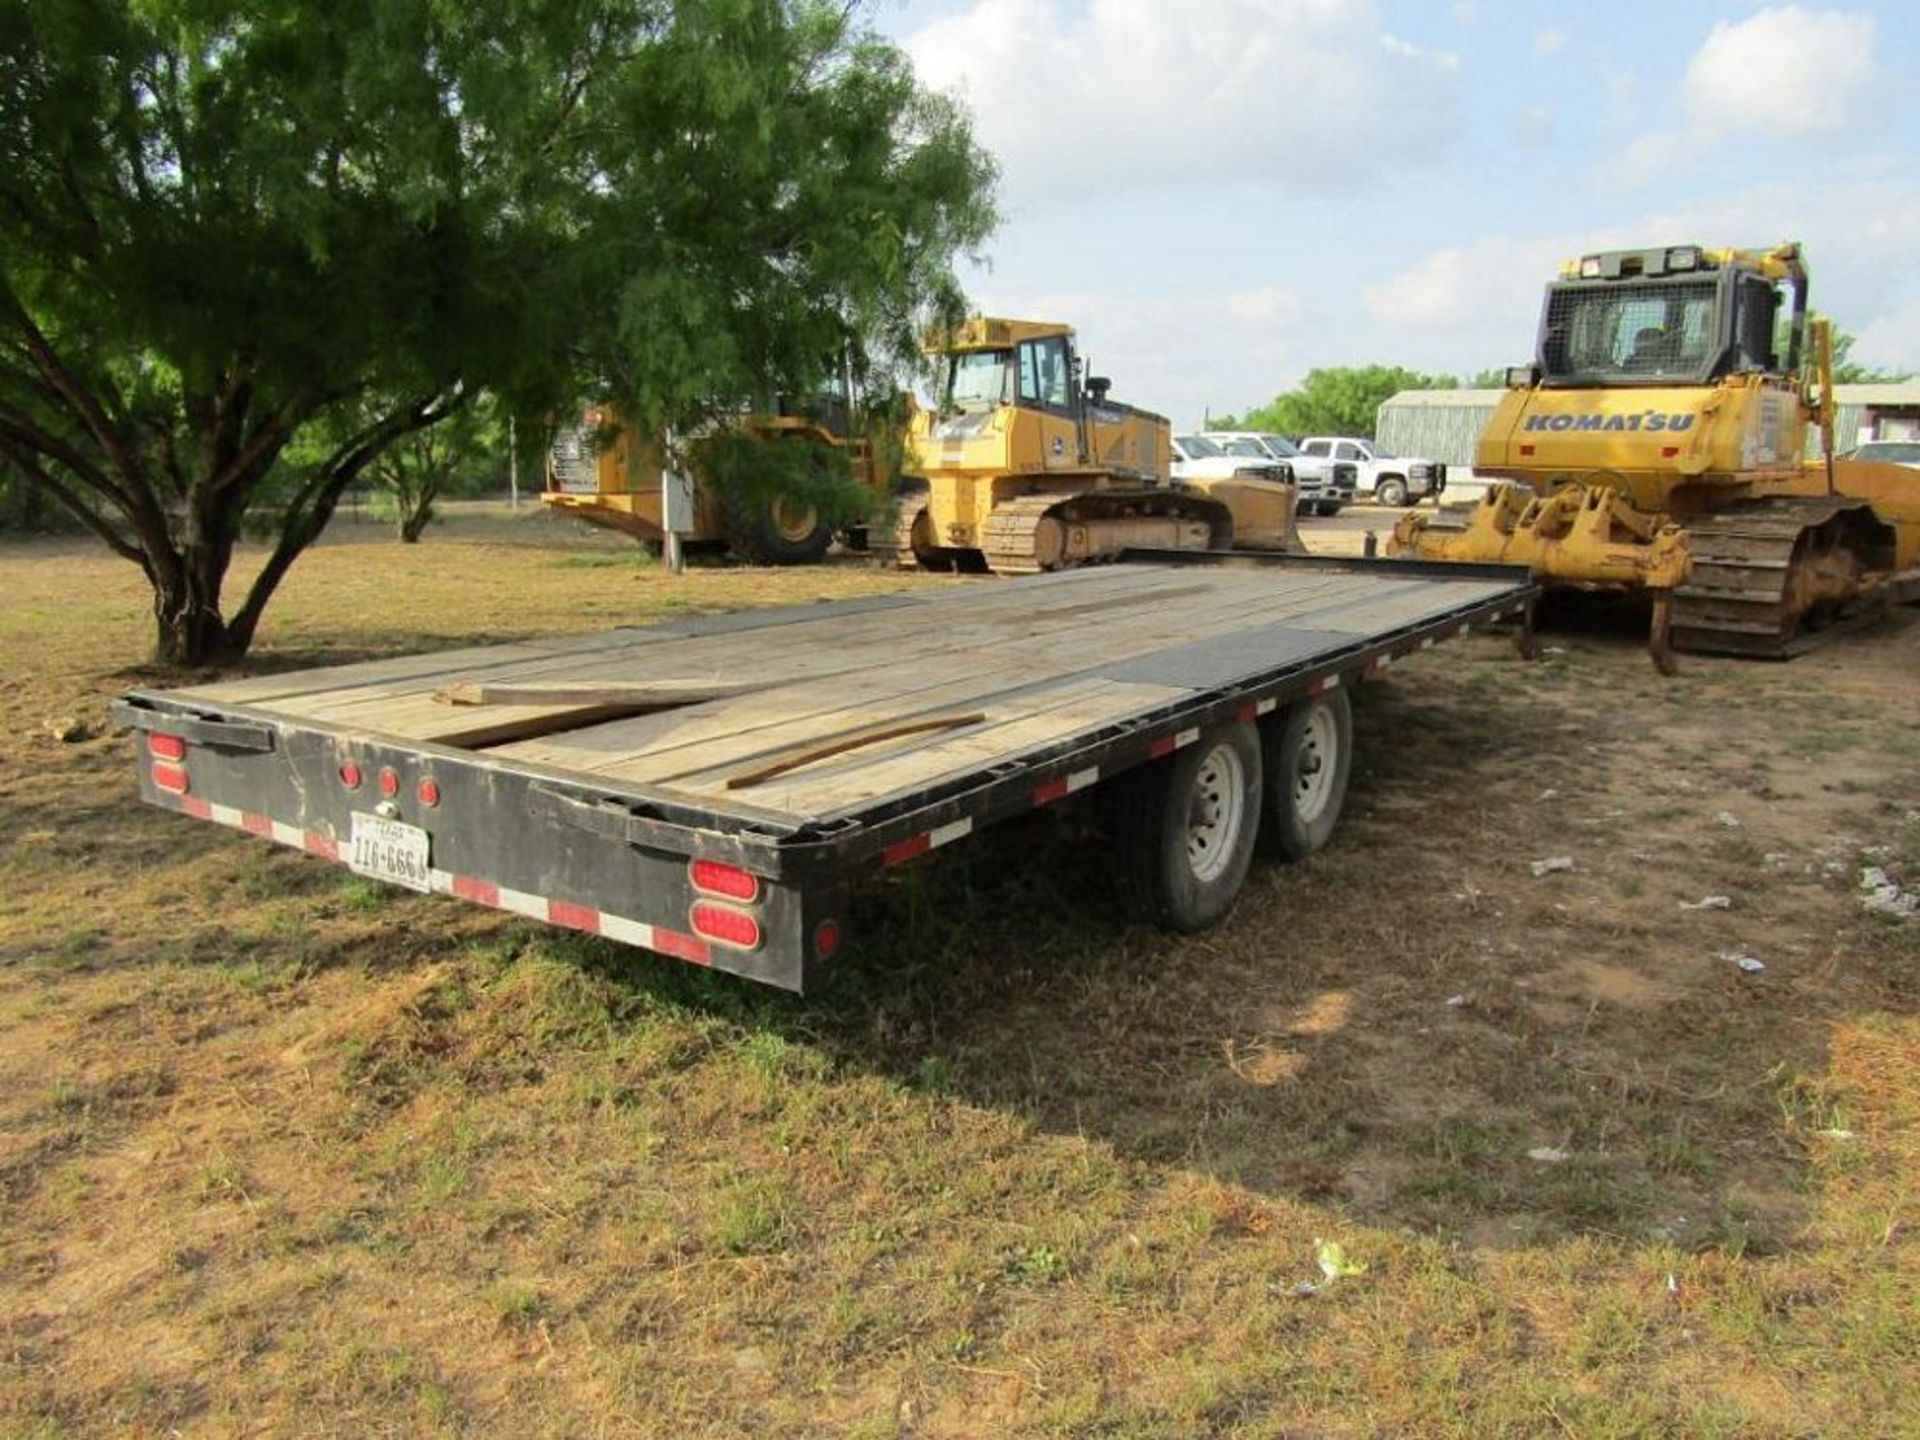 Big Tex Tadem Axle Trailer, 20 ft. x 8 ft. Bed, 140A, #50980 - Image 2 of 4